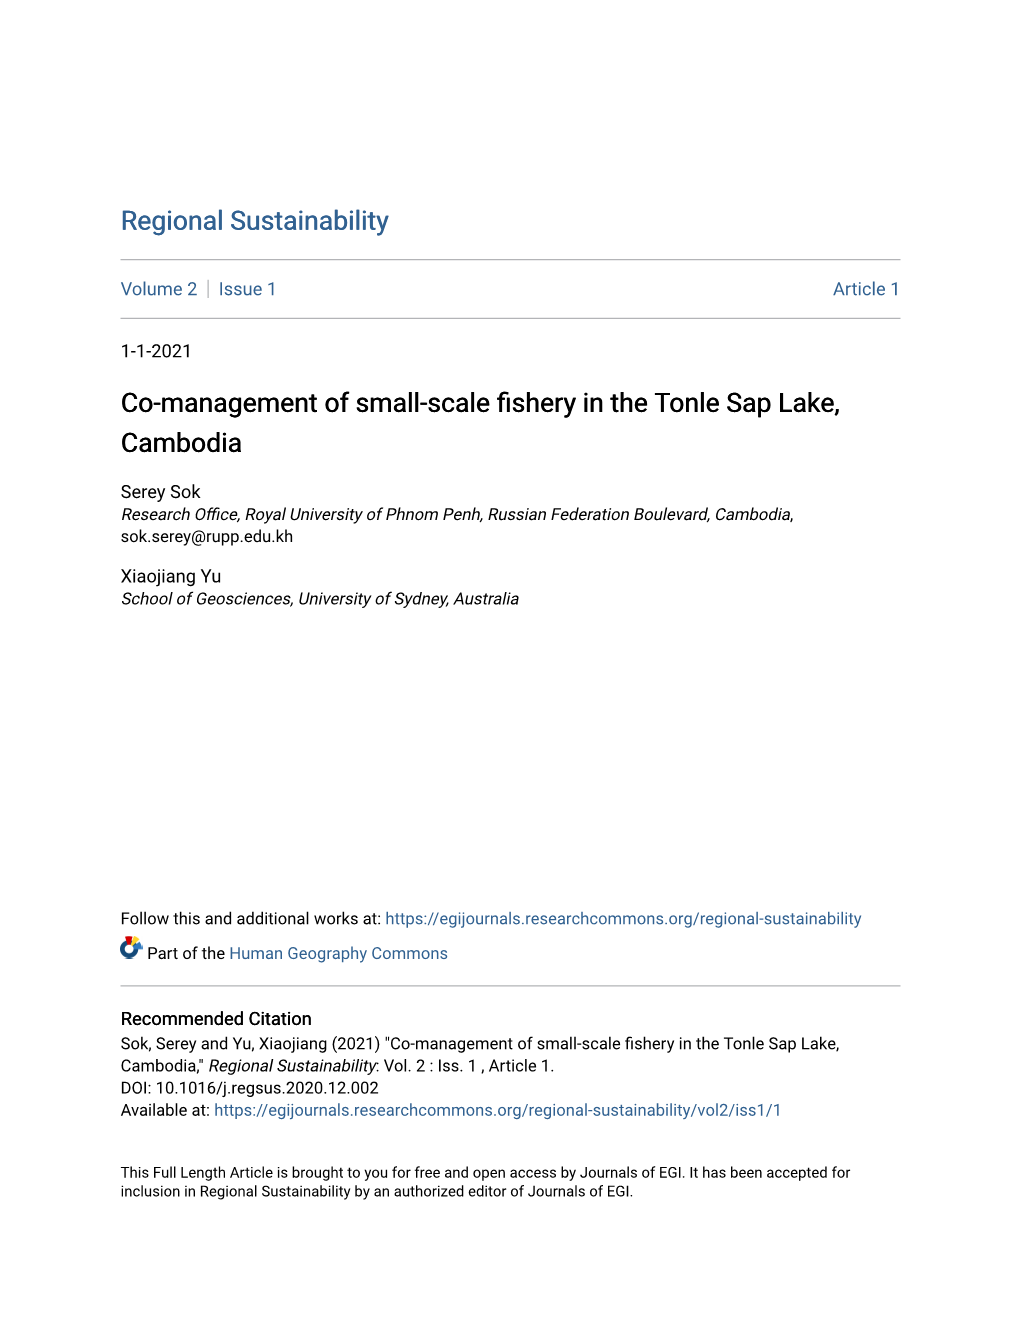 Co-Management of Small-Scale Fishery in the Tonle Sap Lake, Cambodia